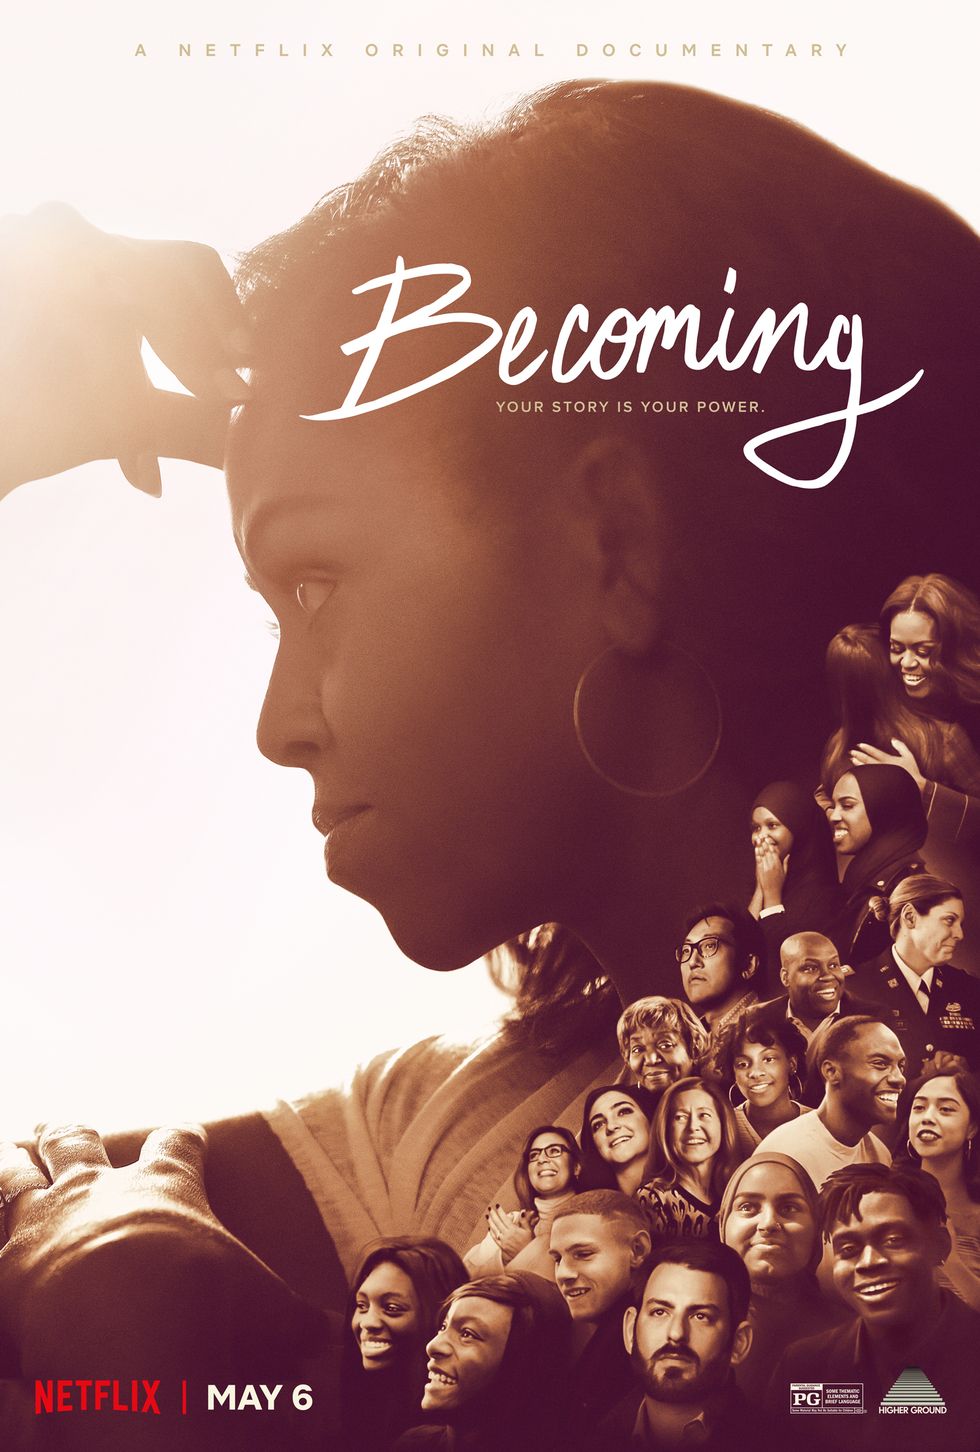 michelle obama documentary becoming